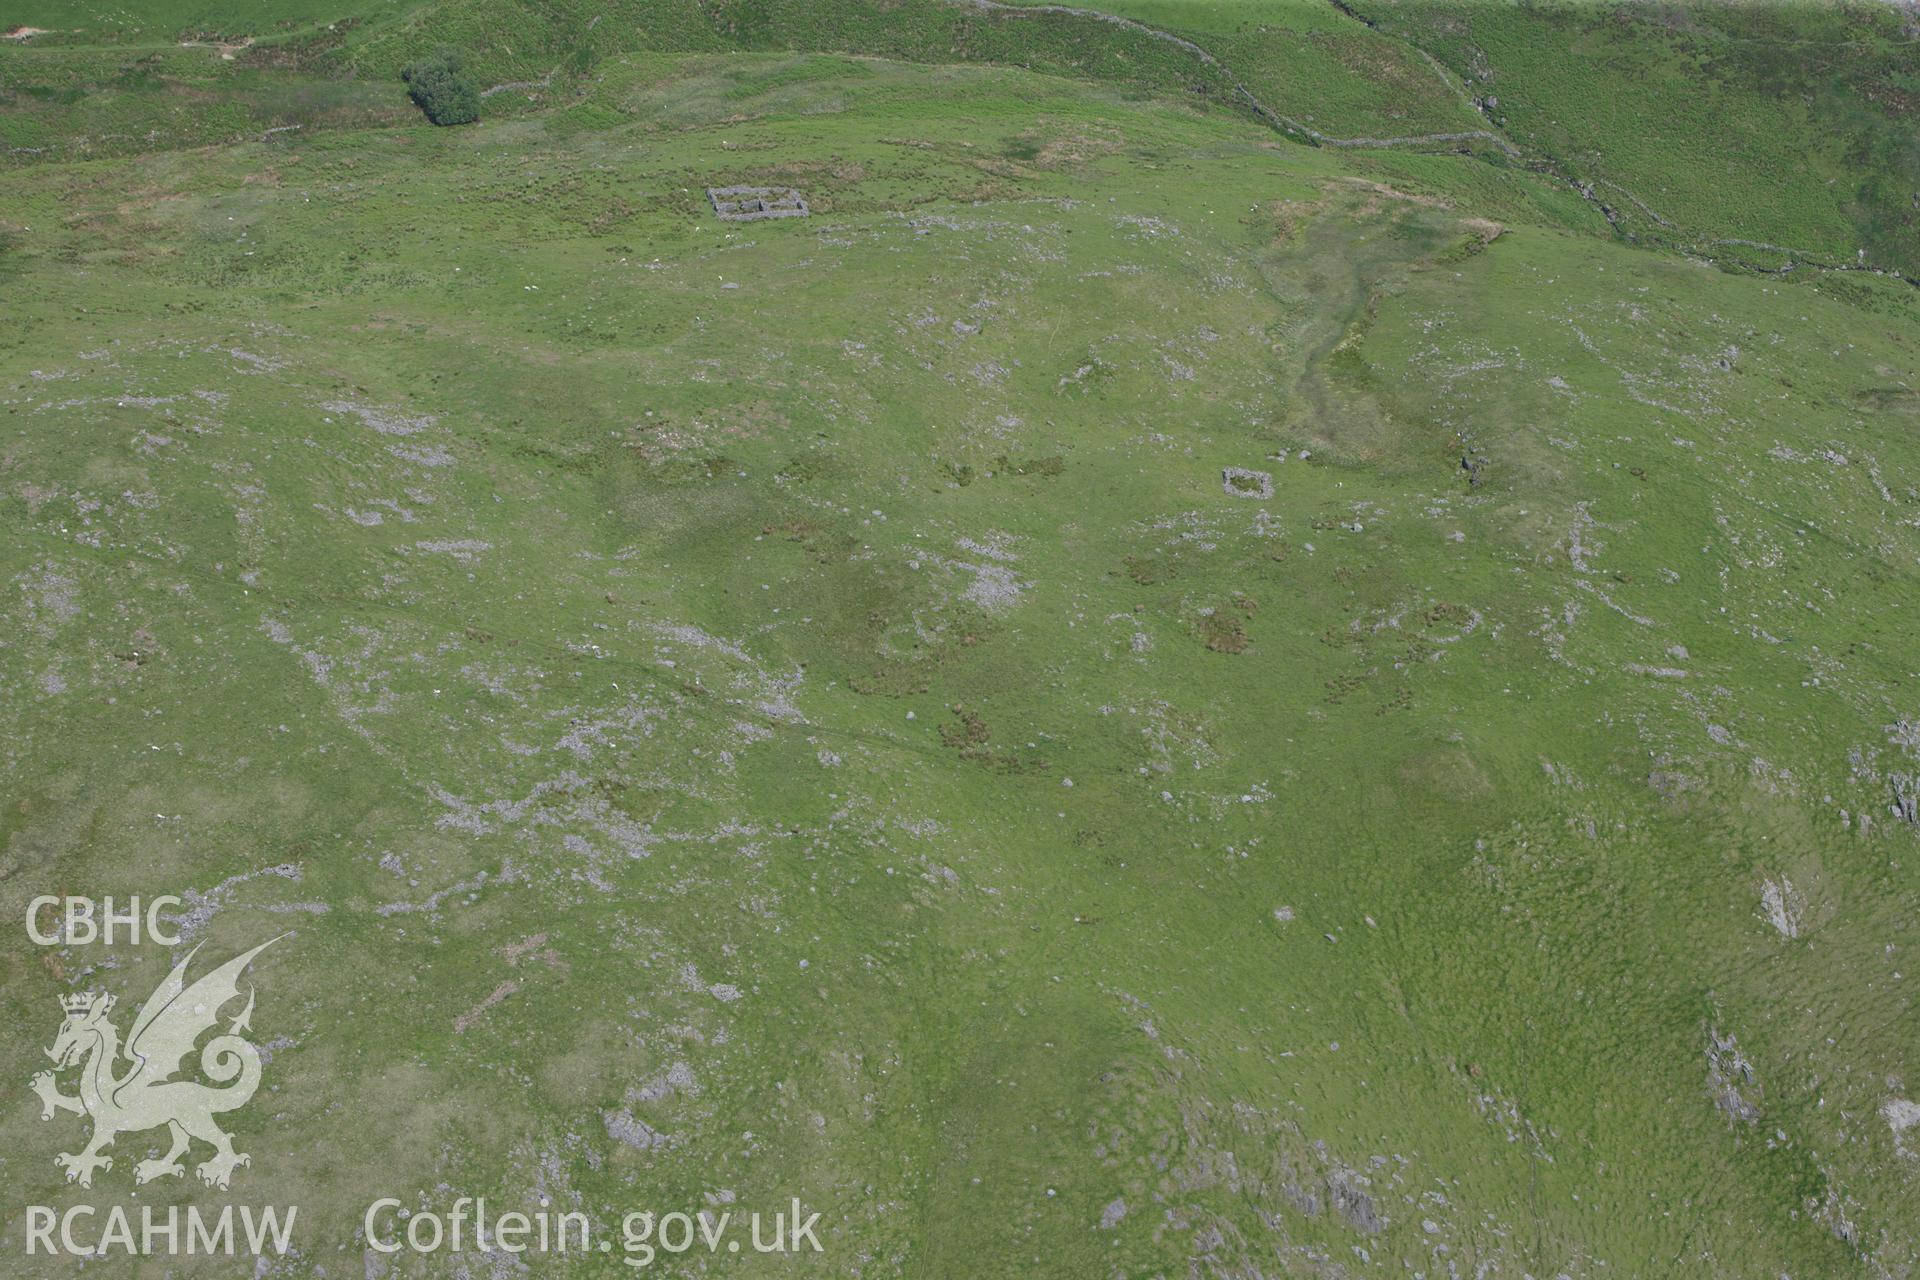 RCAHMW colour oblique aerial photograph of Craig Tyn-y-Cornel Settlement. Taken on 02 June 2009 by Toby Driver